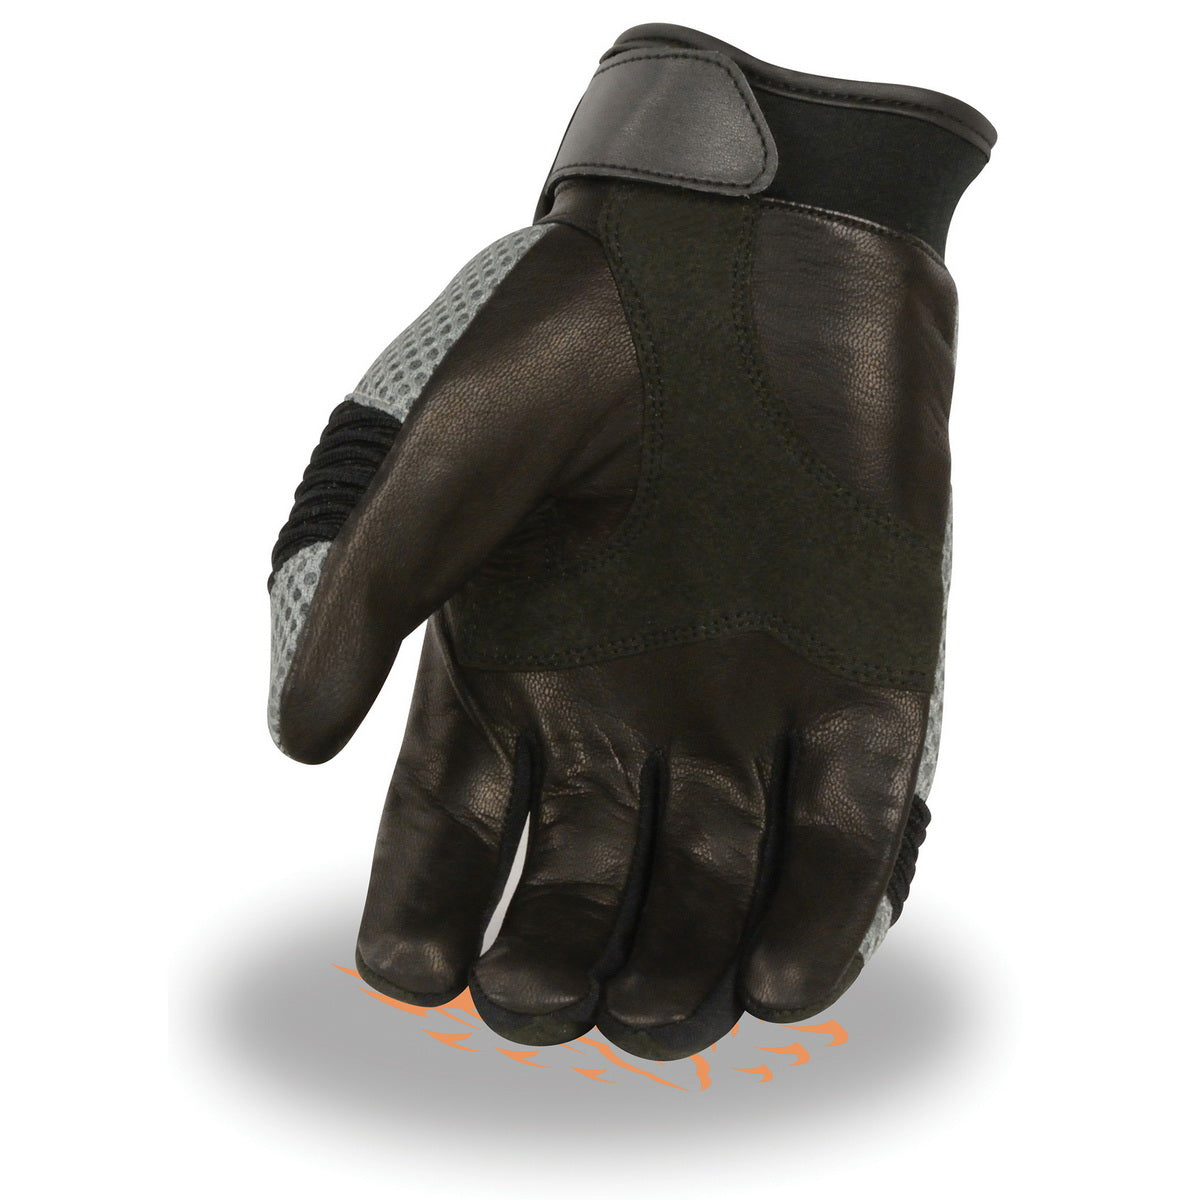 Xelement XG791 Men's Black and Grey Mesh and Leather Racing Gloves